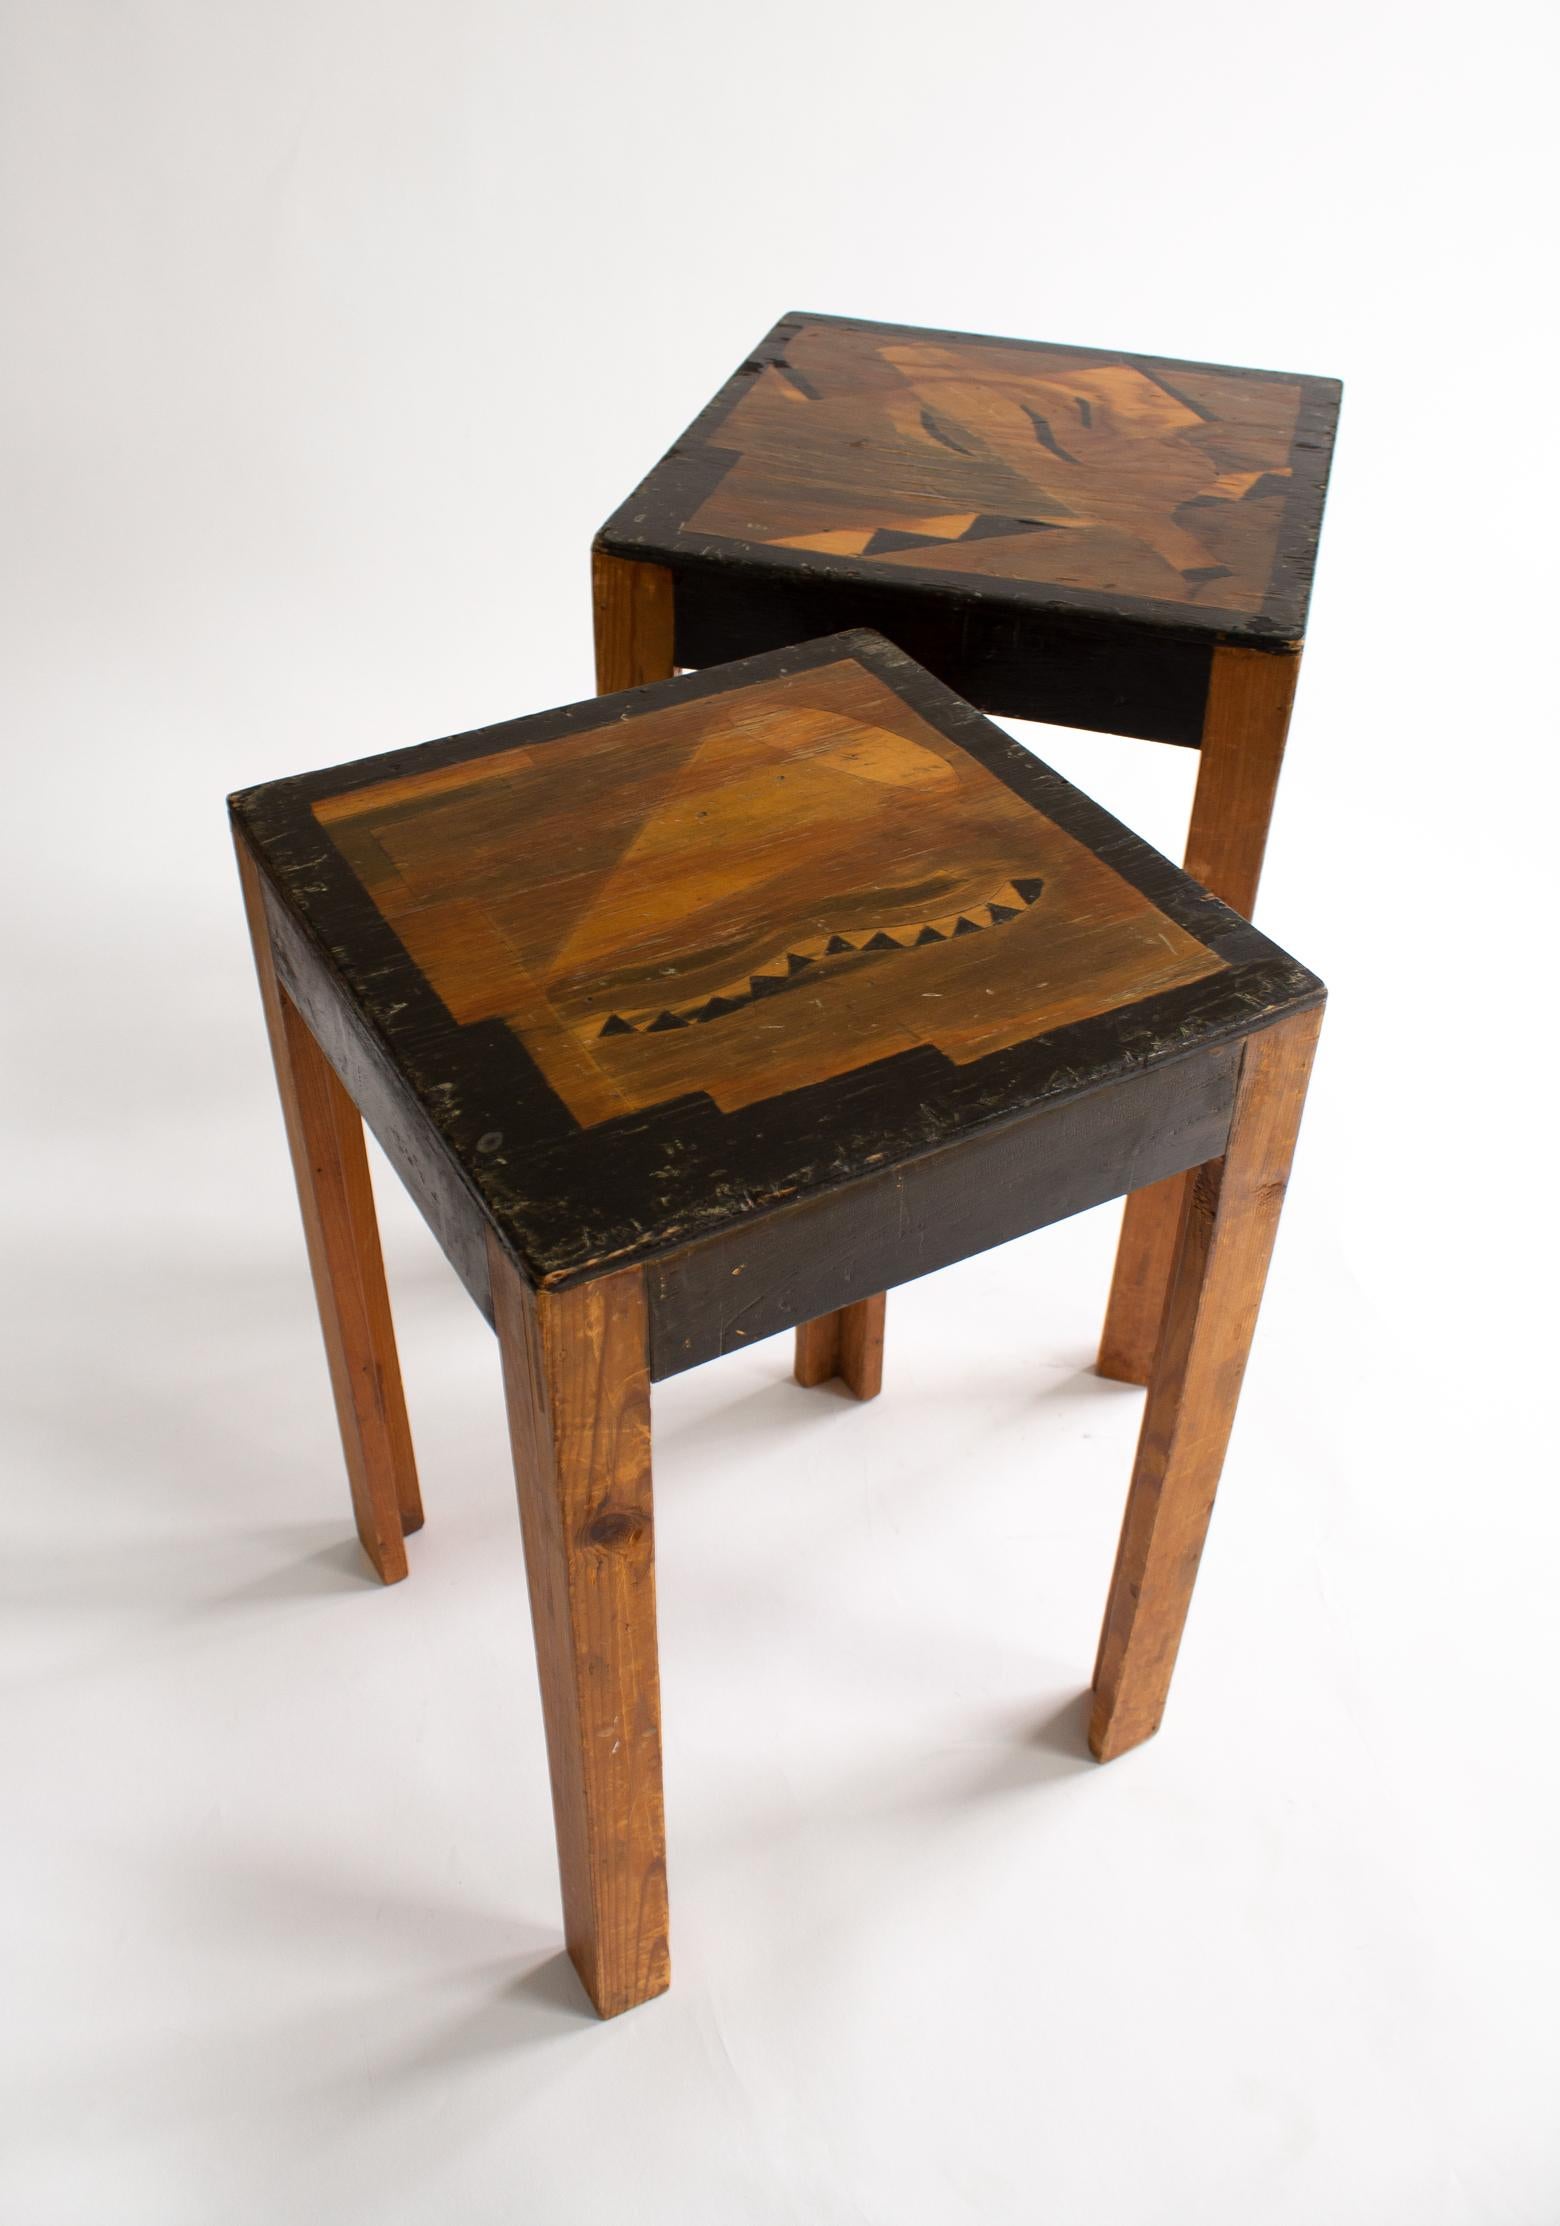 Two Art Deco Nesting Tables Made of Unknown Swedish Artist in 1930s-1940s For Sale 1